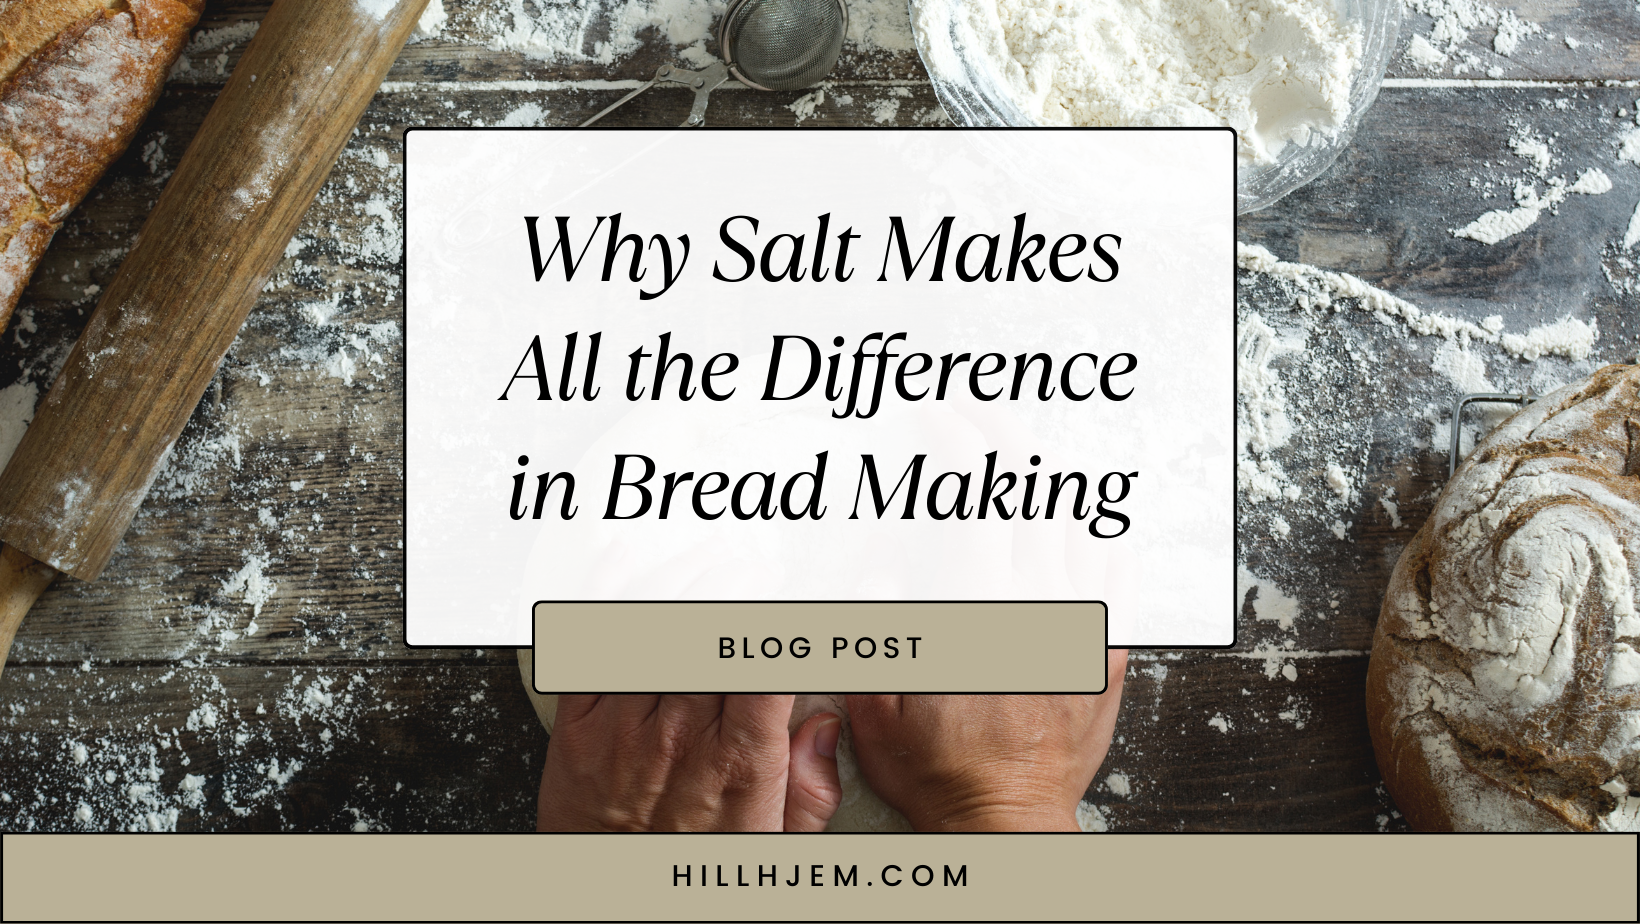 Why Salt Makes All the Difference in Bread Making